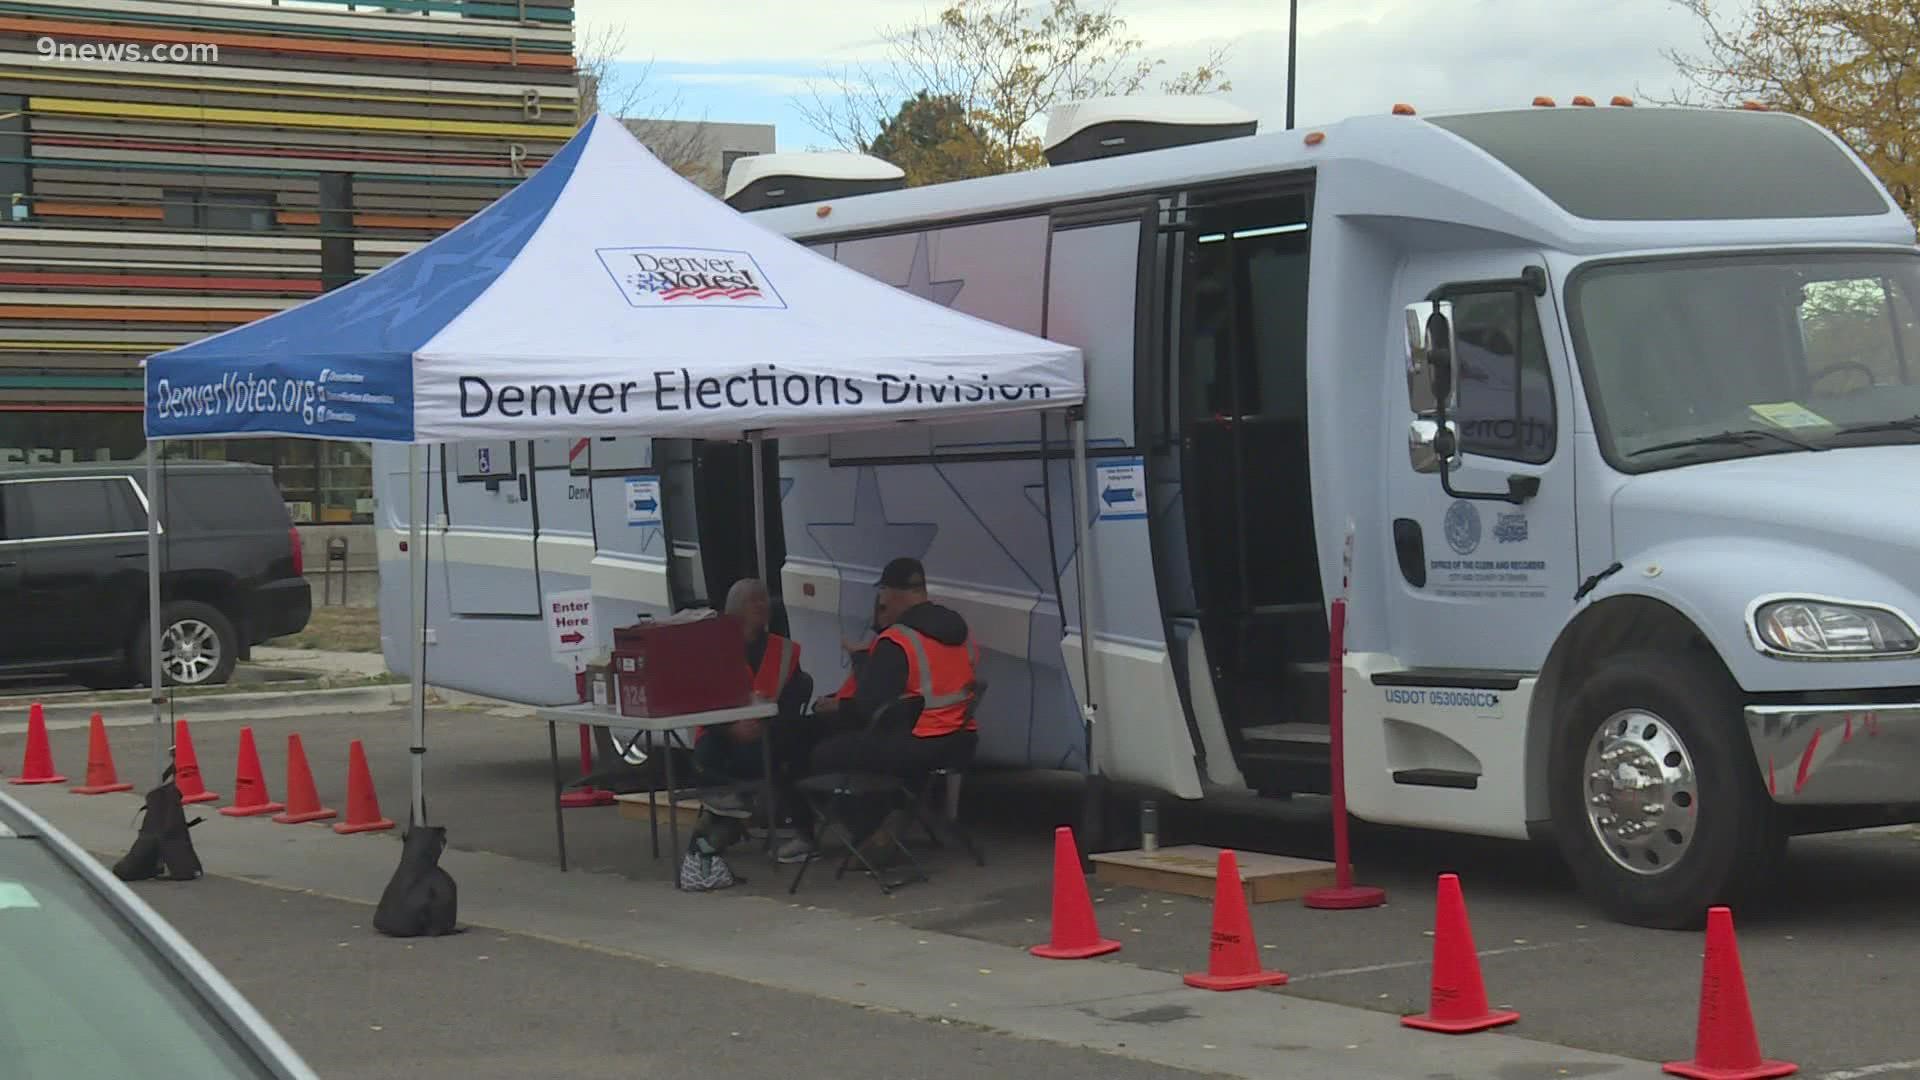 Most Colorado voters return their mailed ballots, and in an odd-year election, in-person voting is even rarer. But Denver has mobile voting units, just in case.